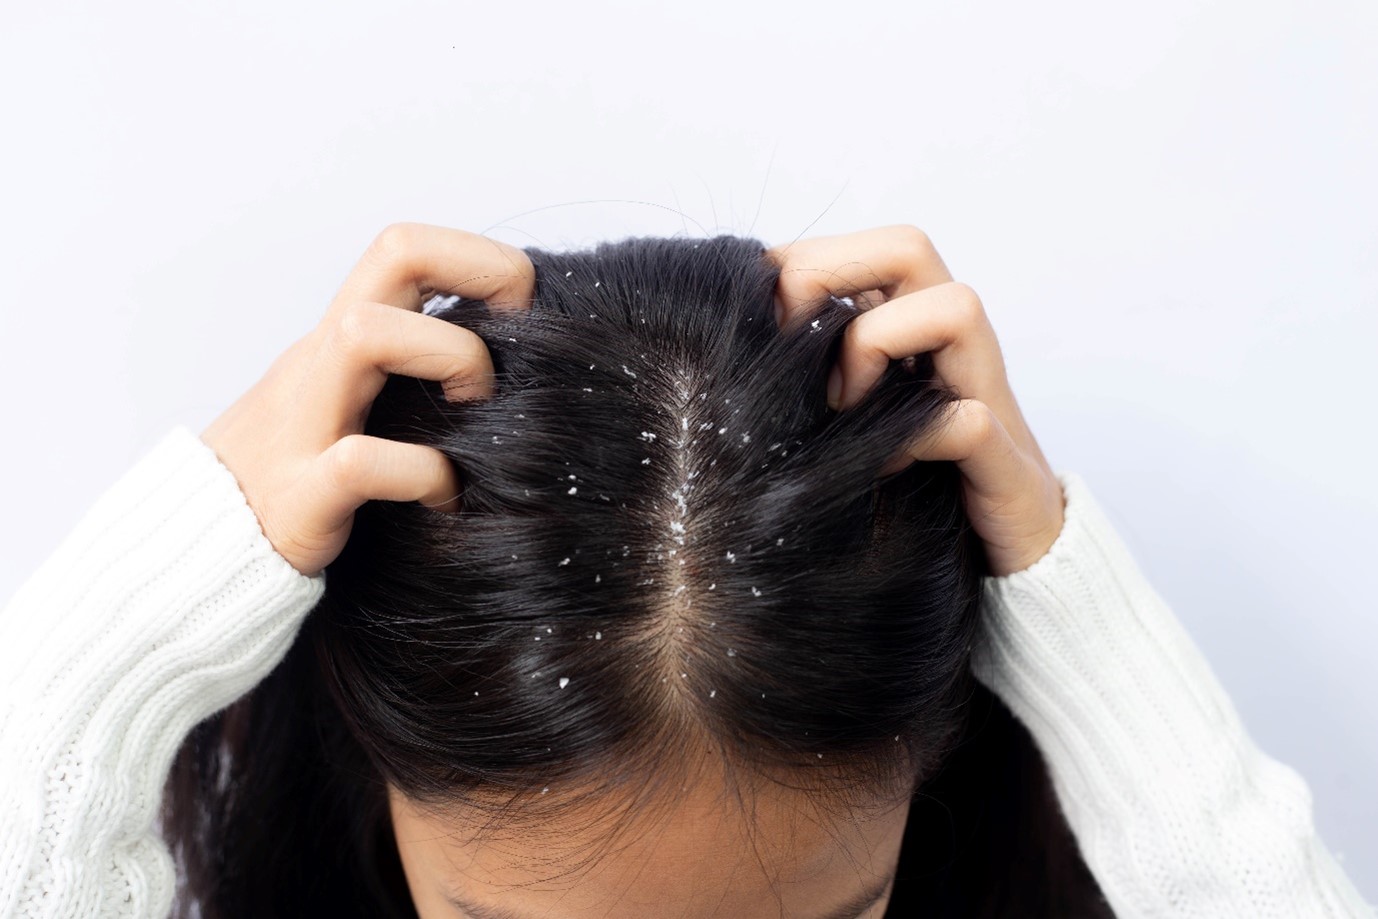 Woman with dandruff in her hair